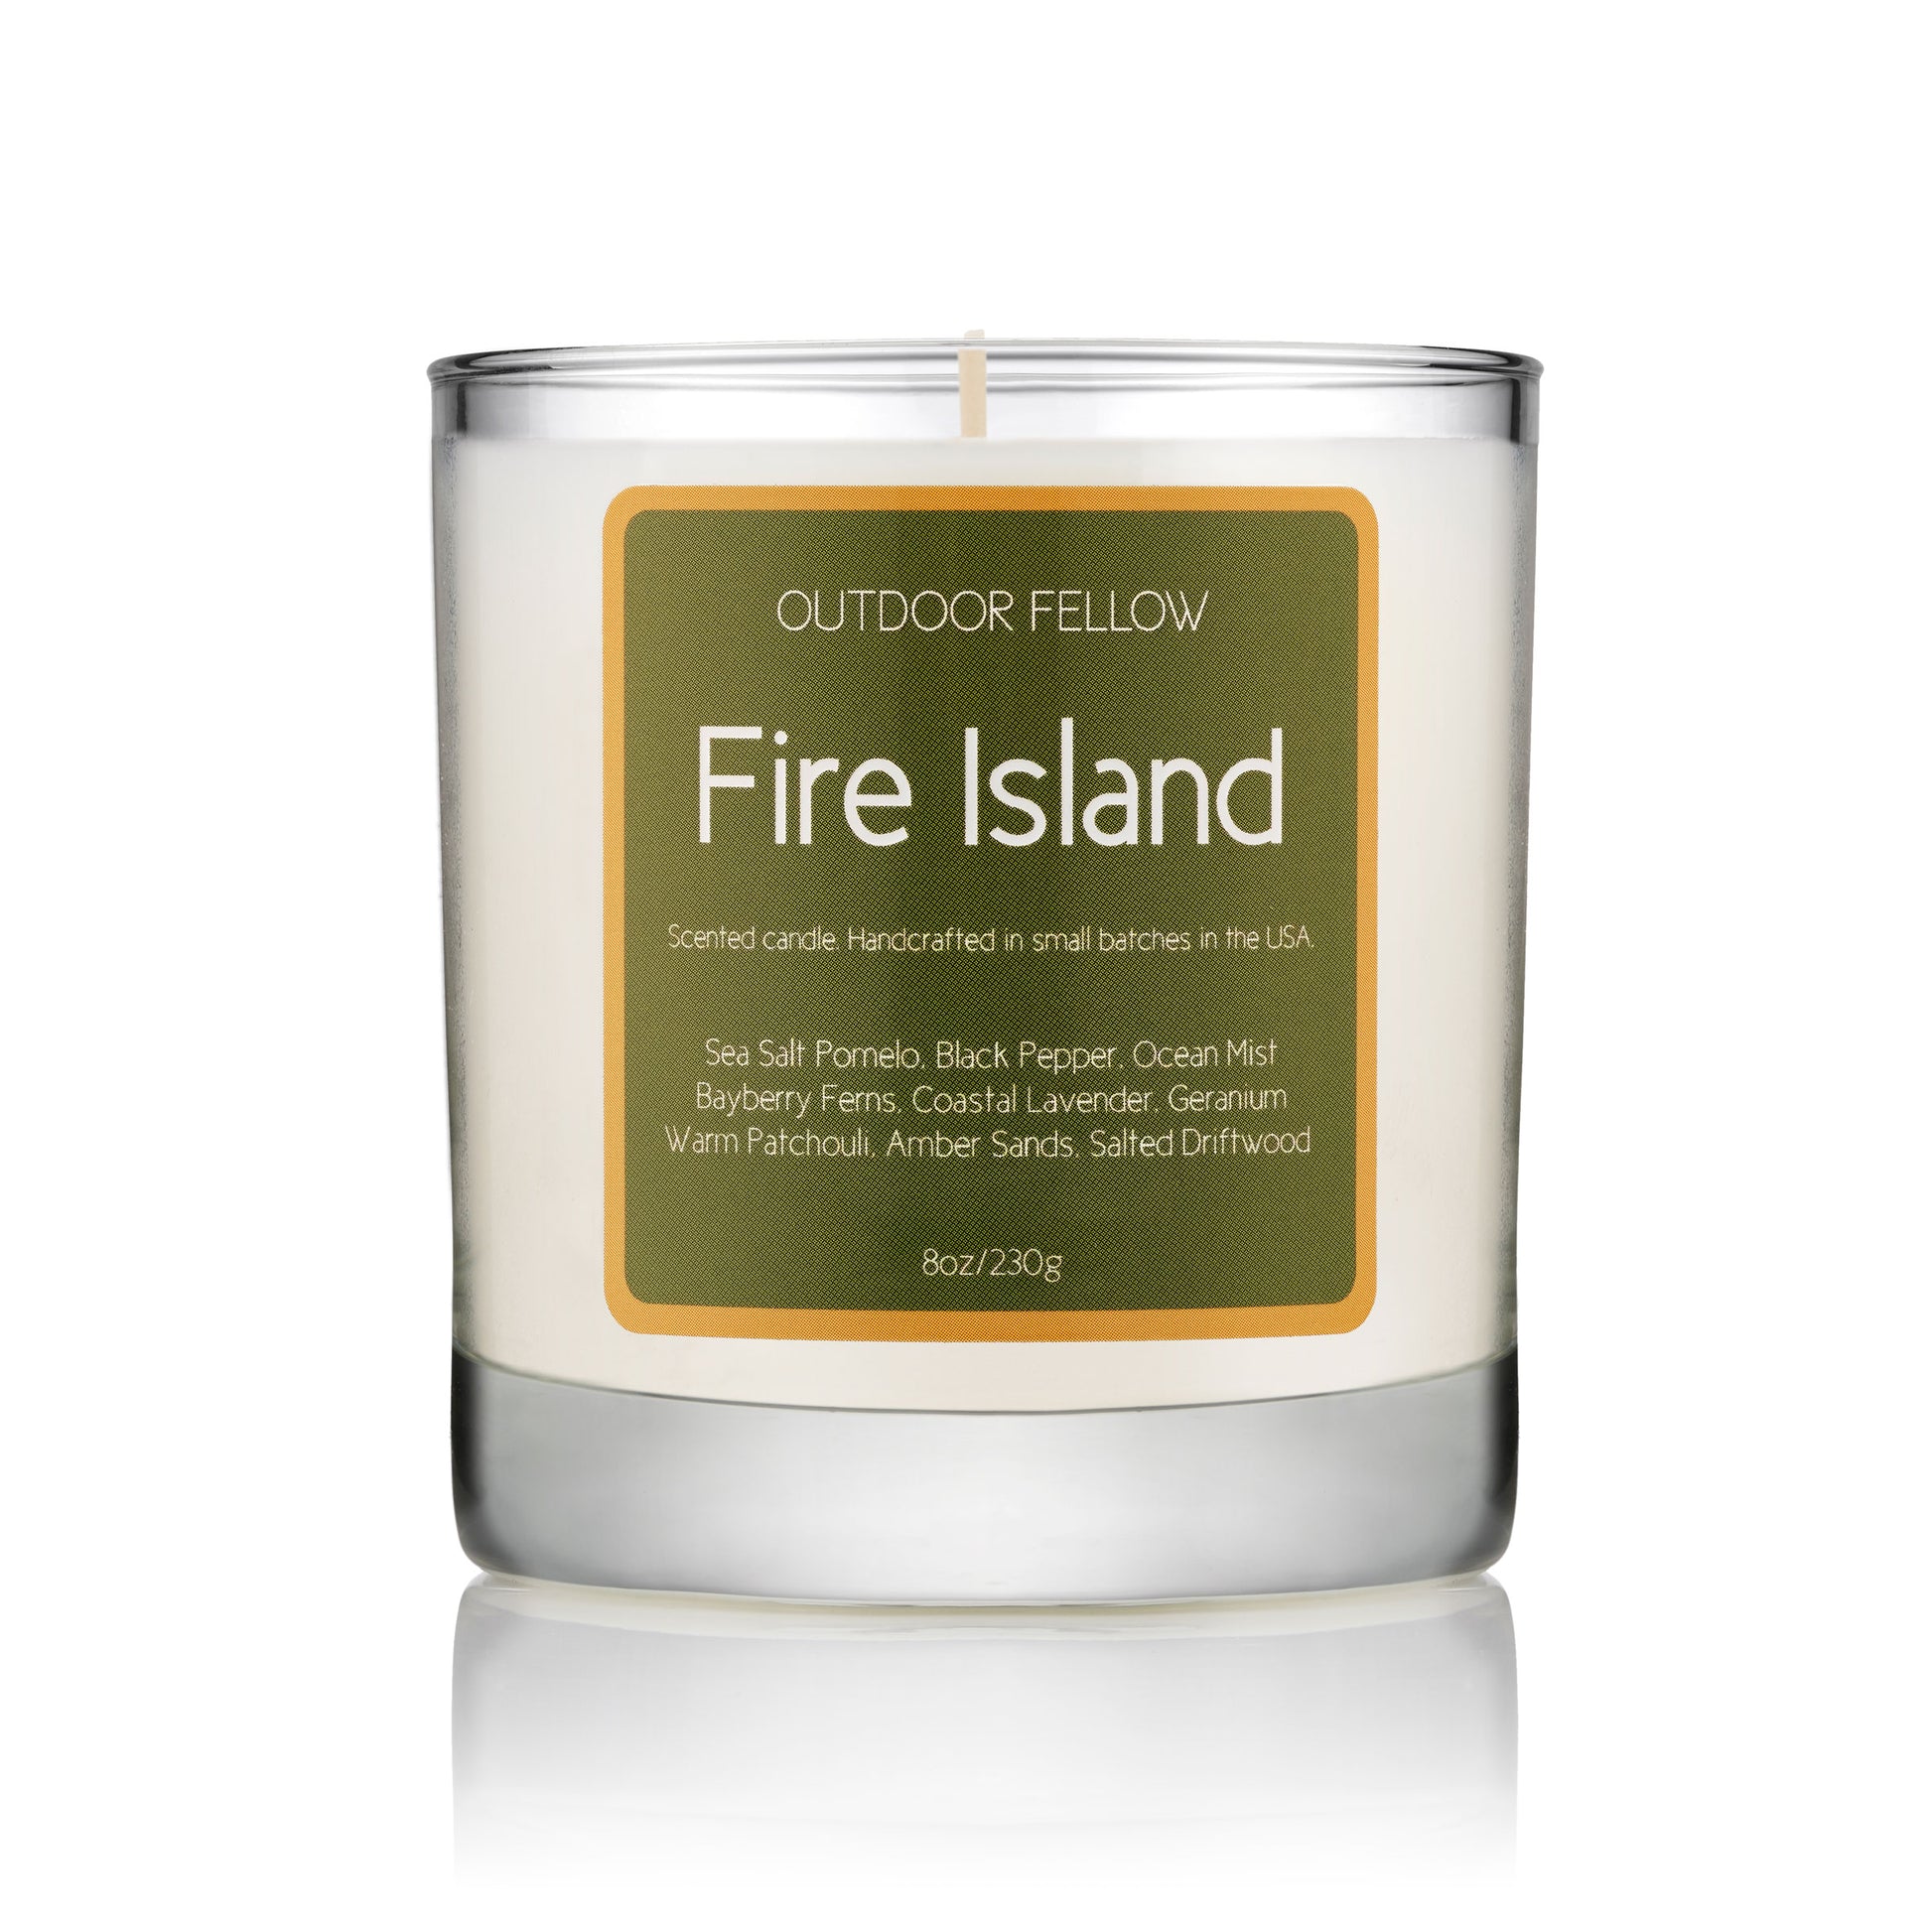 Fire Island scented candle on white background